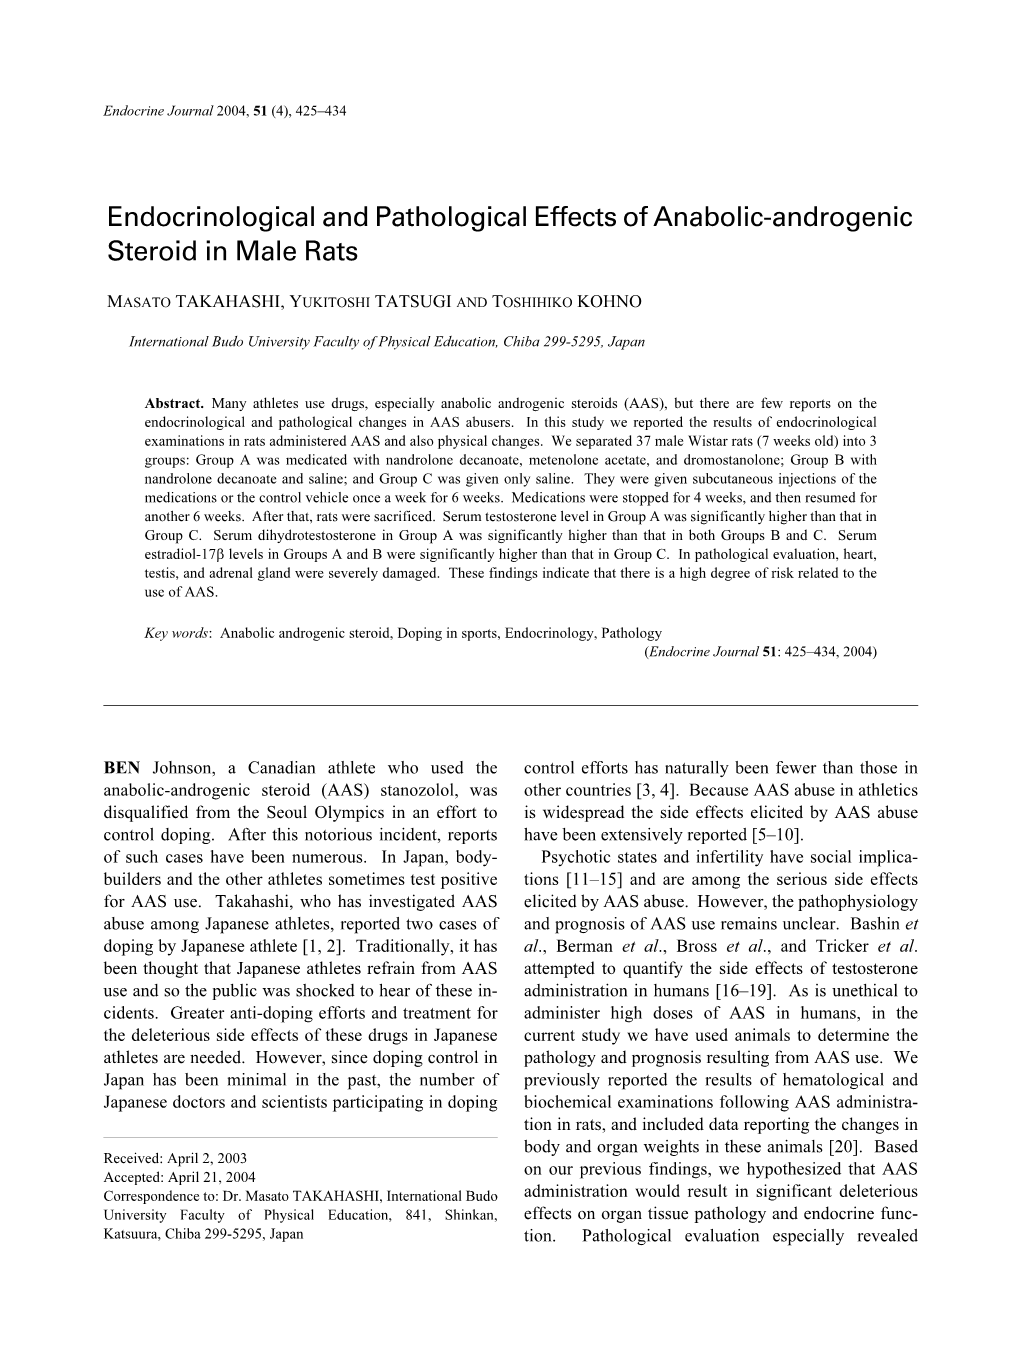 Endocrinological and Pathological Effects of Anabolic-Androgenic Steroid in Male Rats